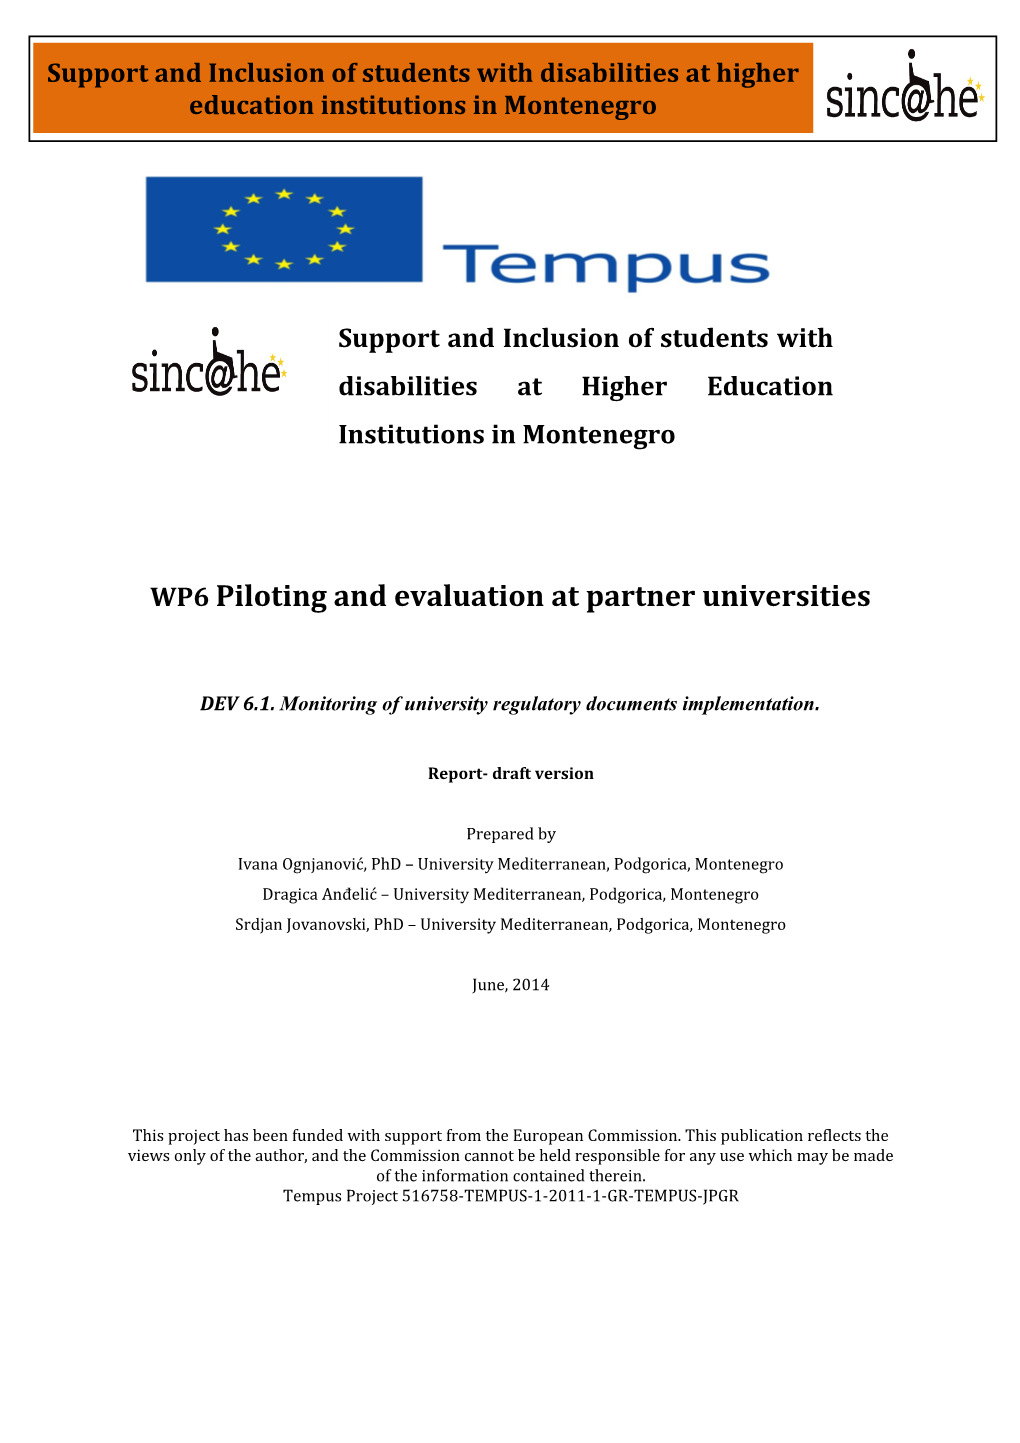 WP6 Piloting and Evaluation at Partner Universities